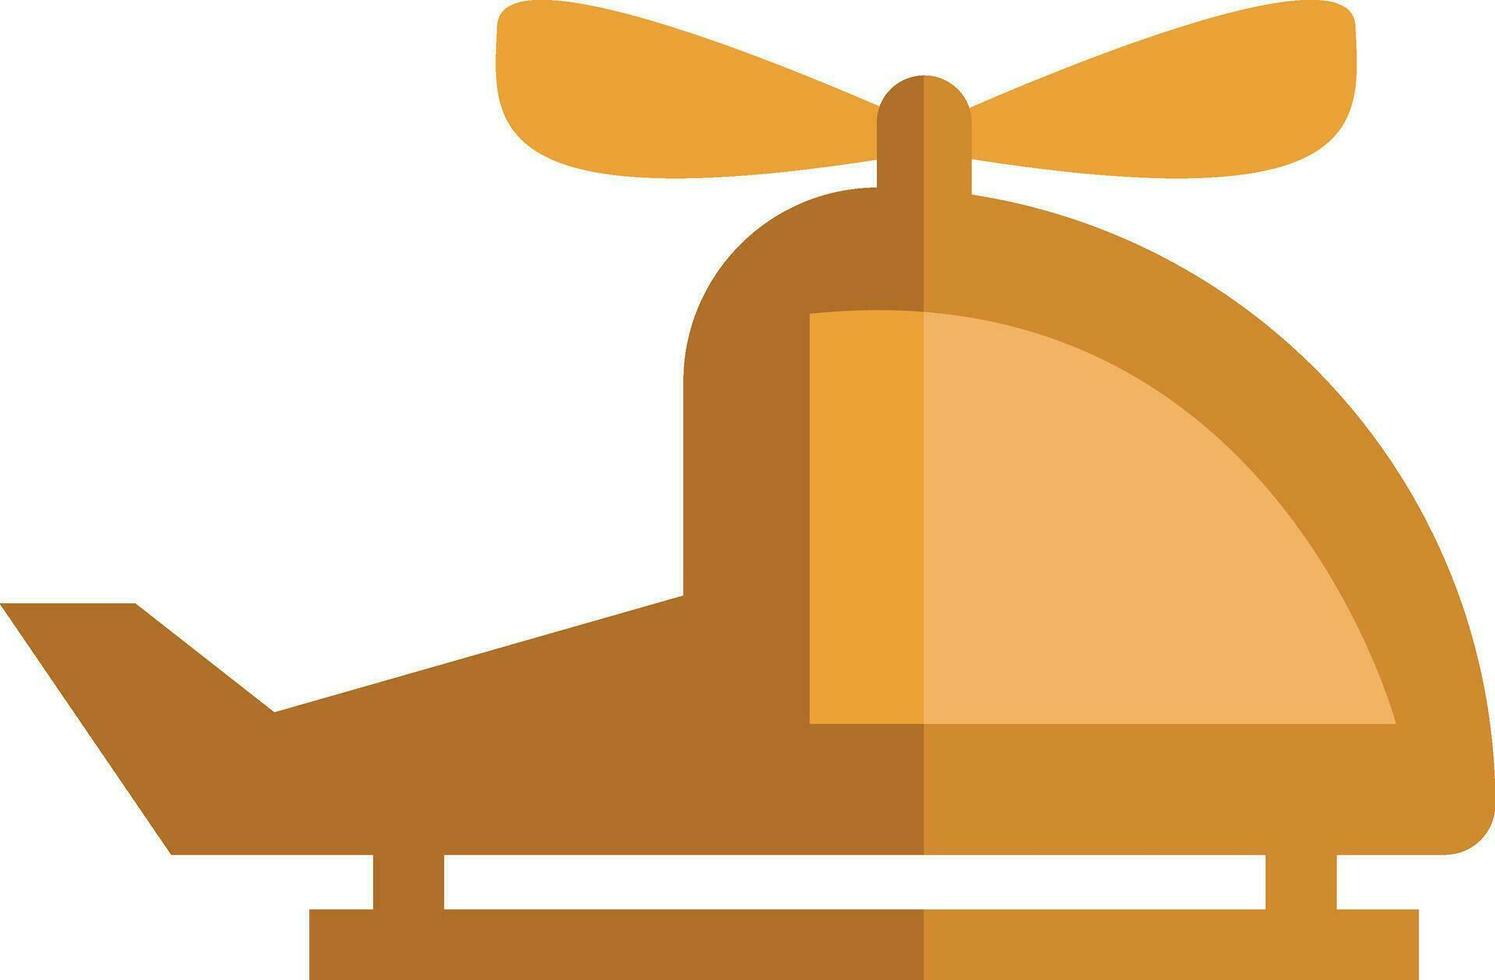 Army helicopter, icon, vector on white background.